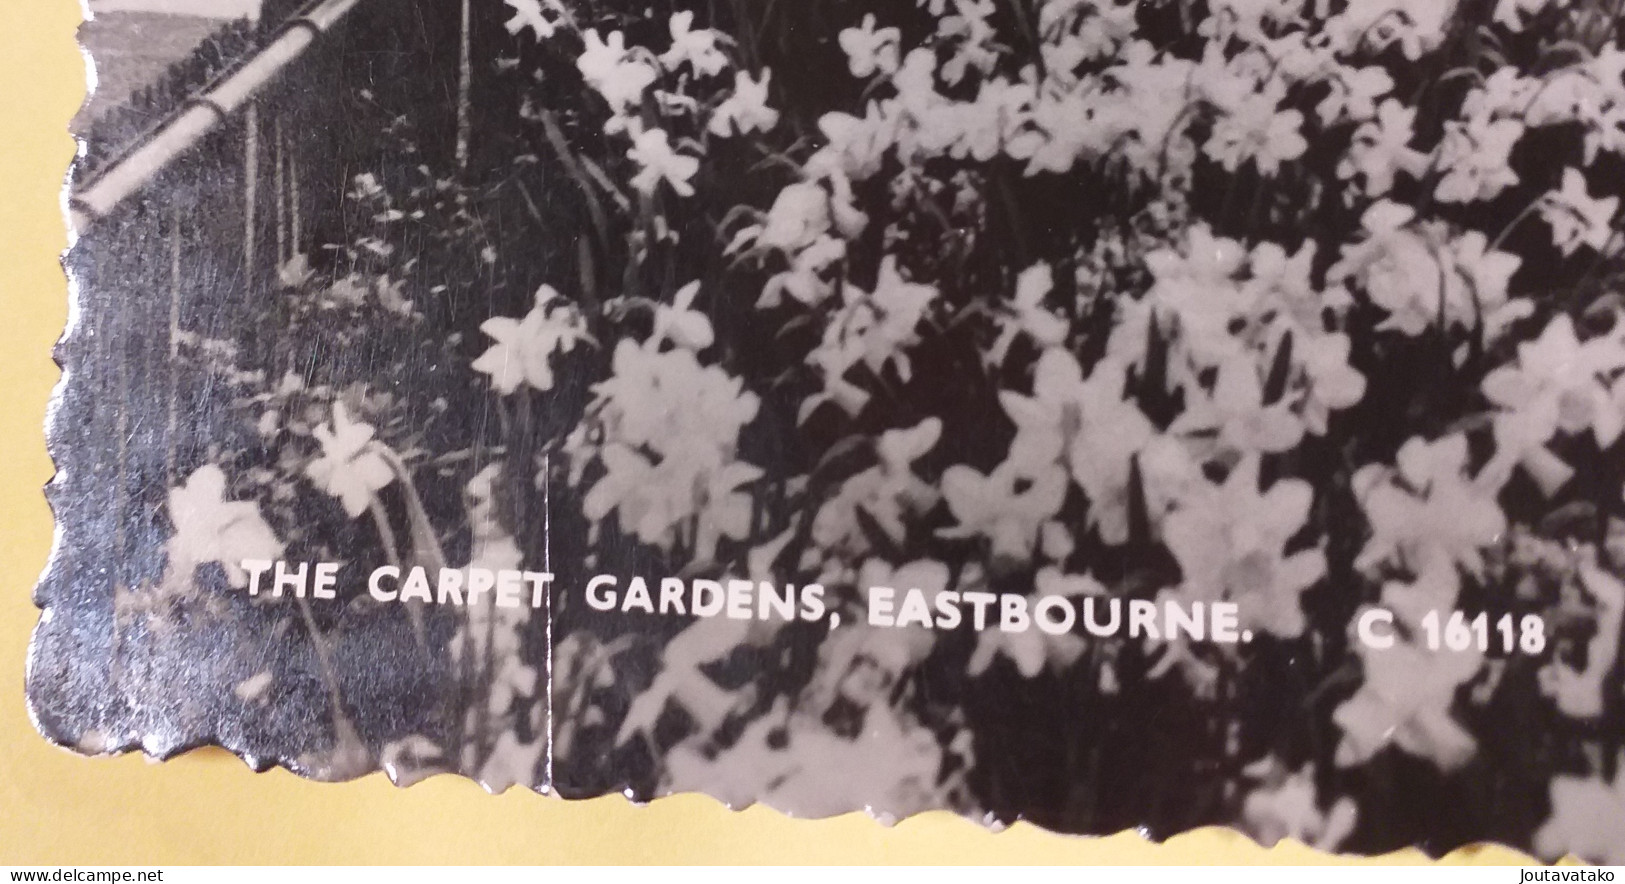 The Carpet Gardens, Eastbourne - Posted 1962 Have You Taken Out Your Licence For Radio-TV Slogan - Eastbourne